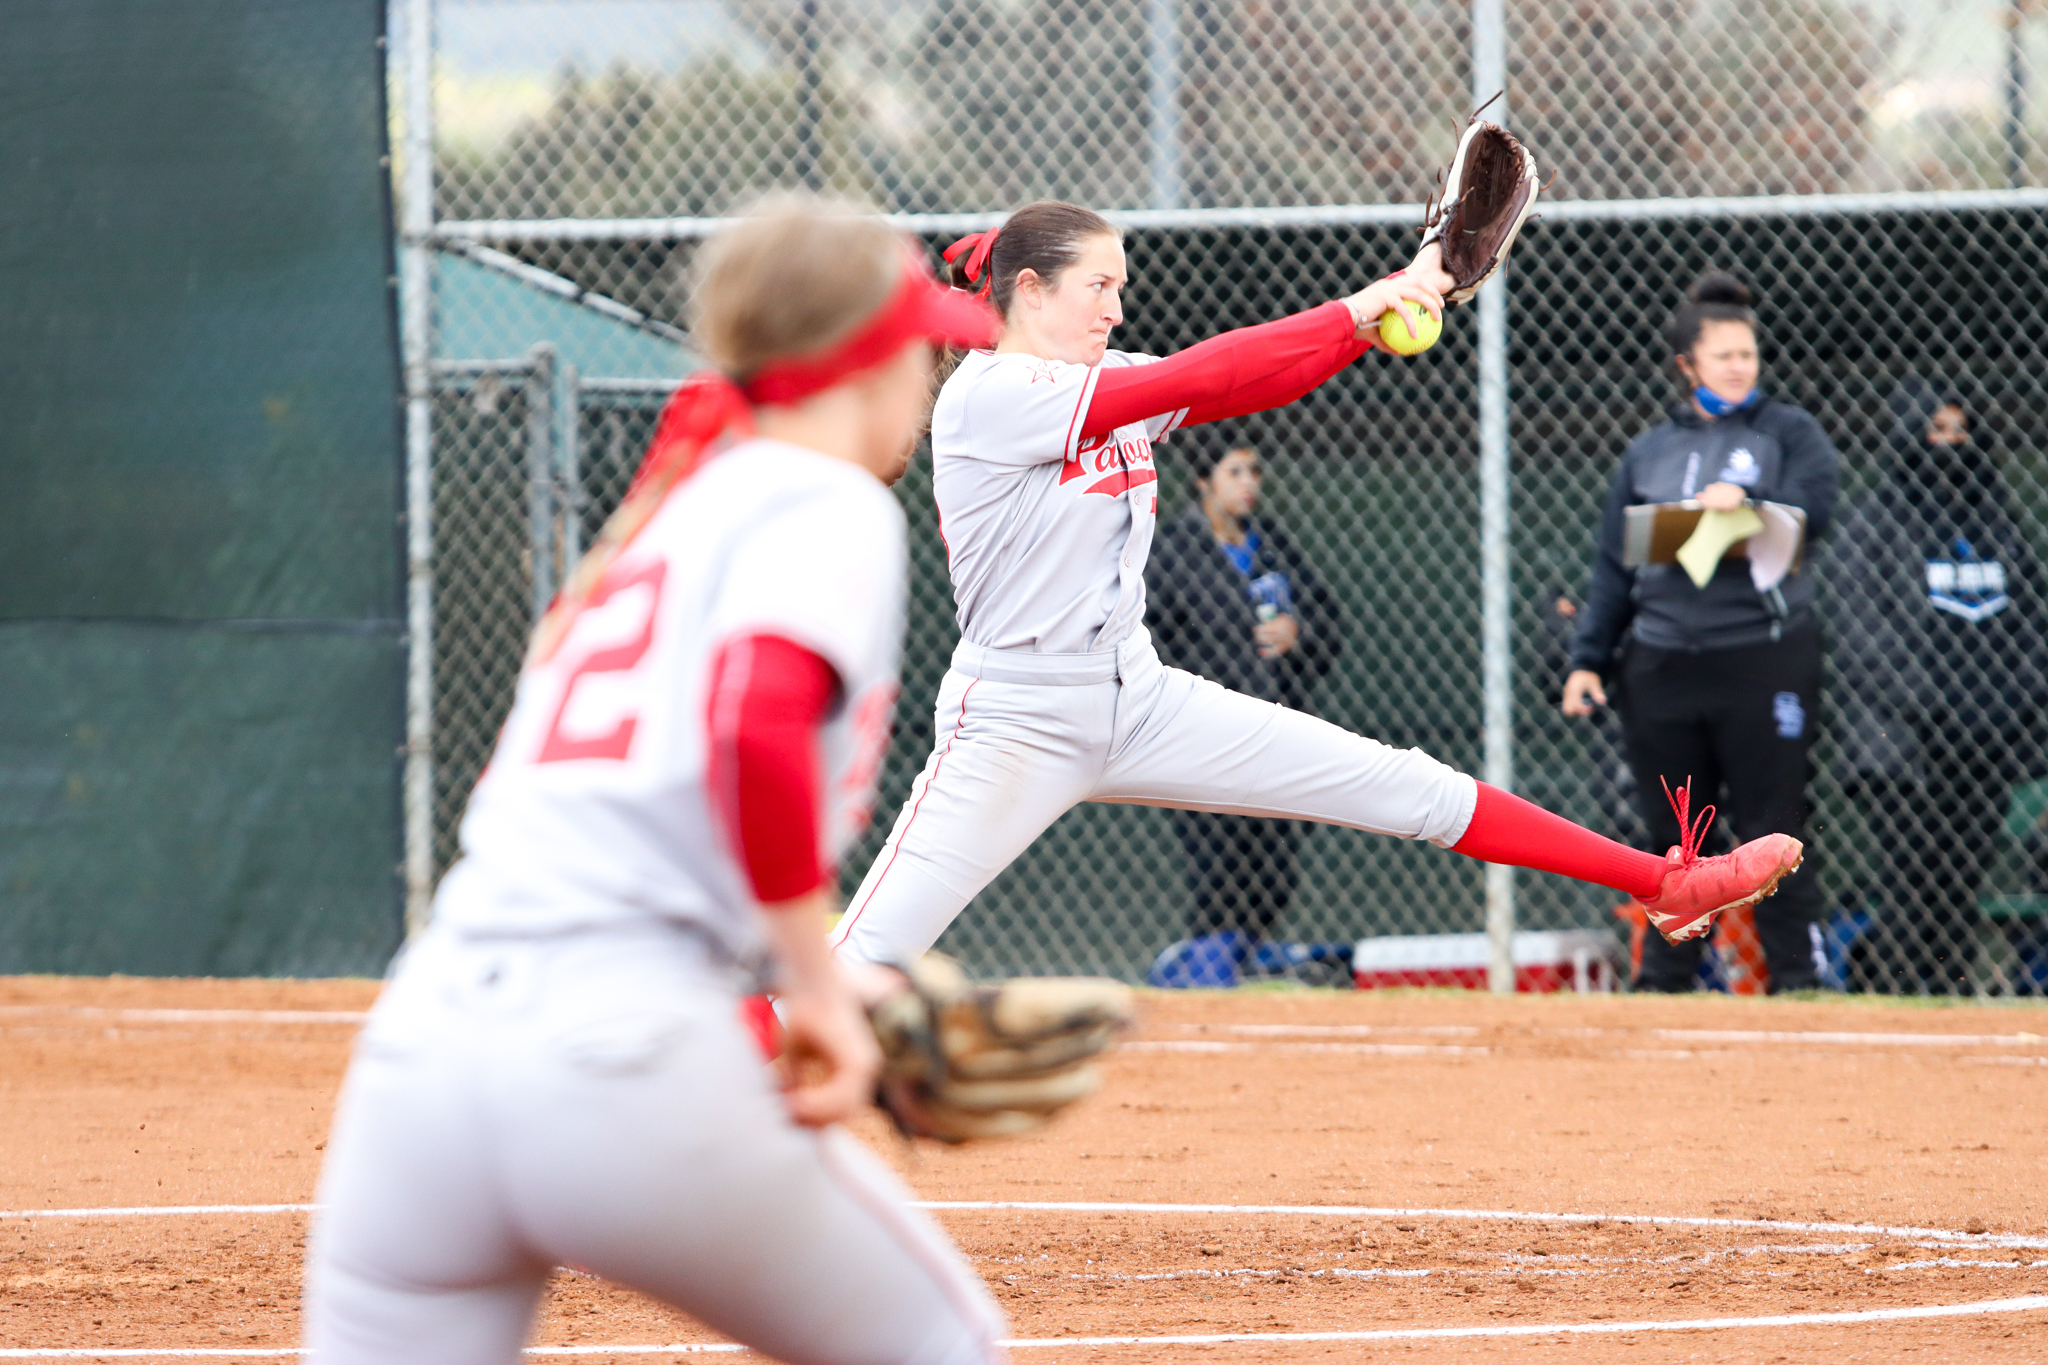 India Caldwell delivers a pitch against San Bernardino Valley College. Photo by Cara Heise.